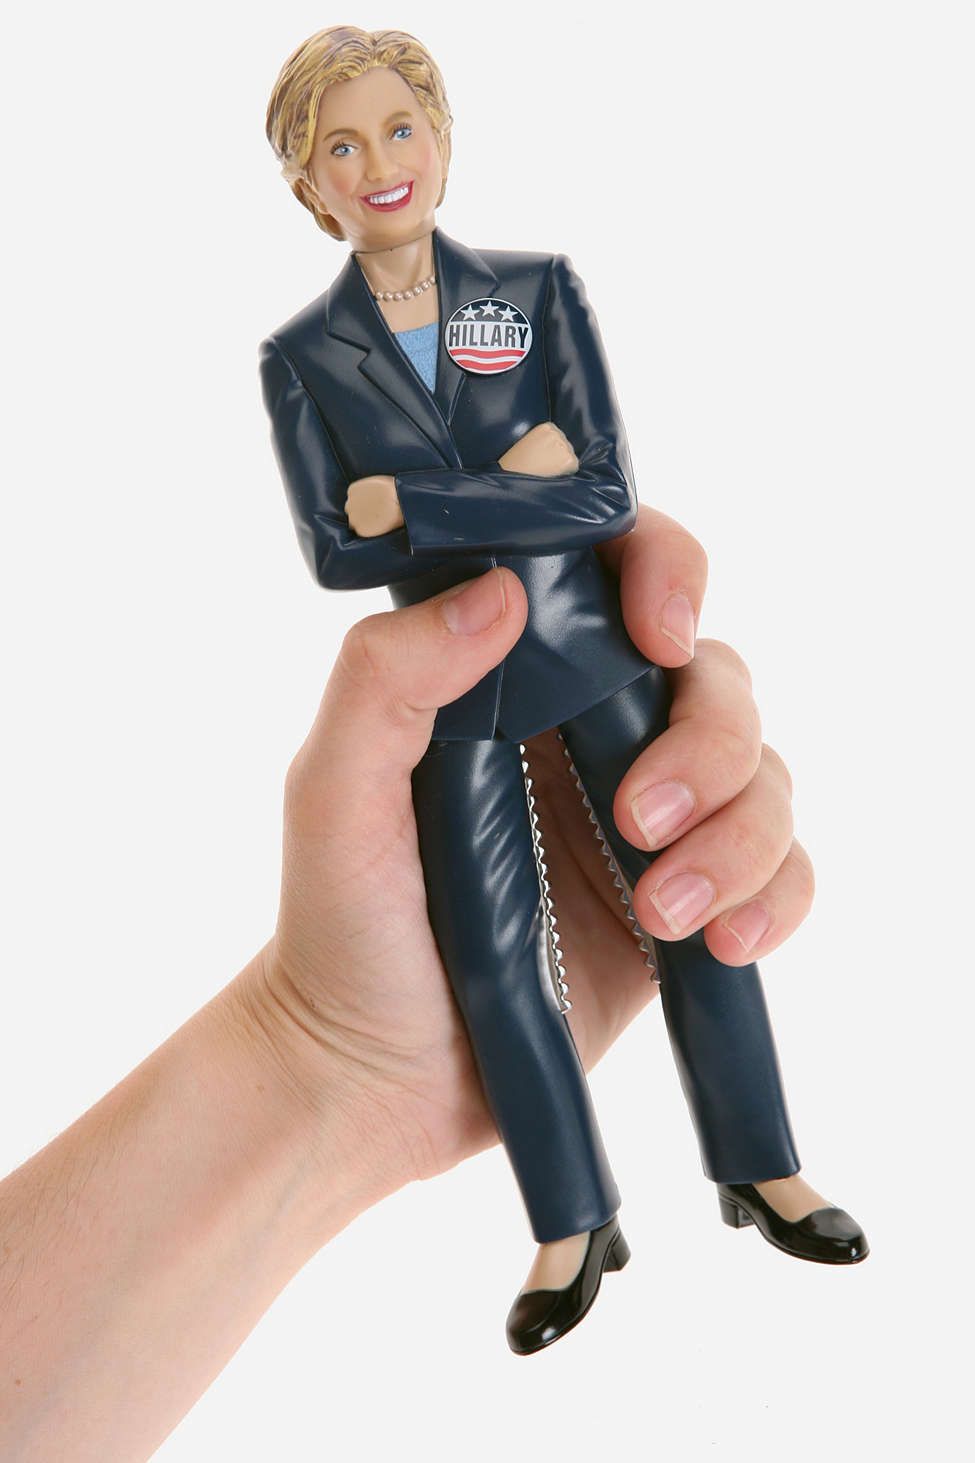 Urban Outfitters have made a Hillary Clinton nutcracker which is all kinds of misogynistic